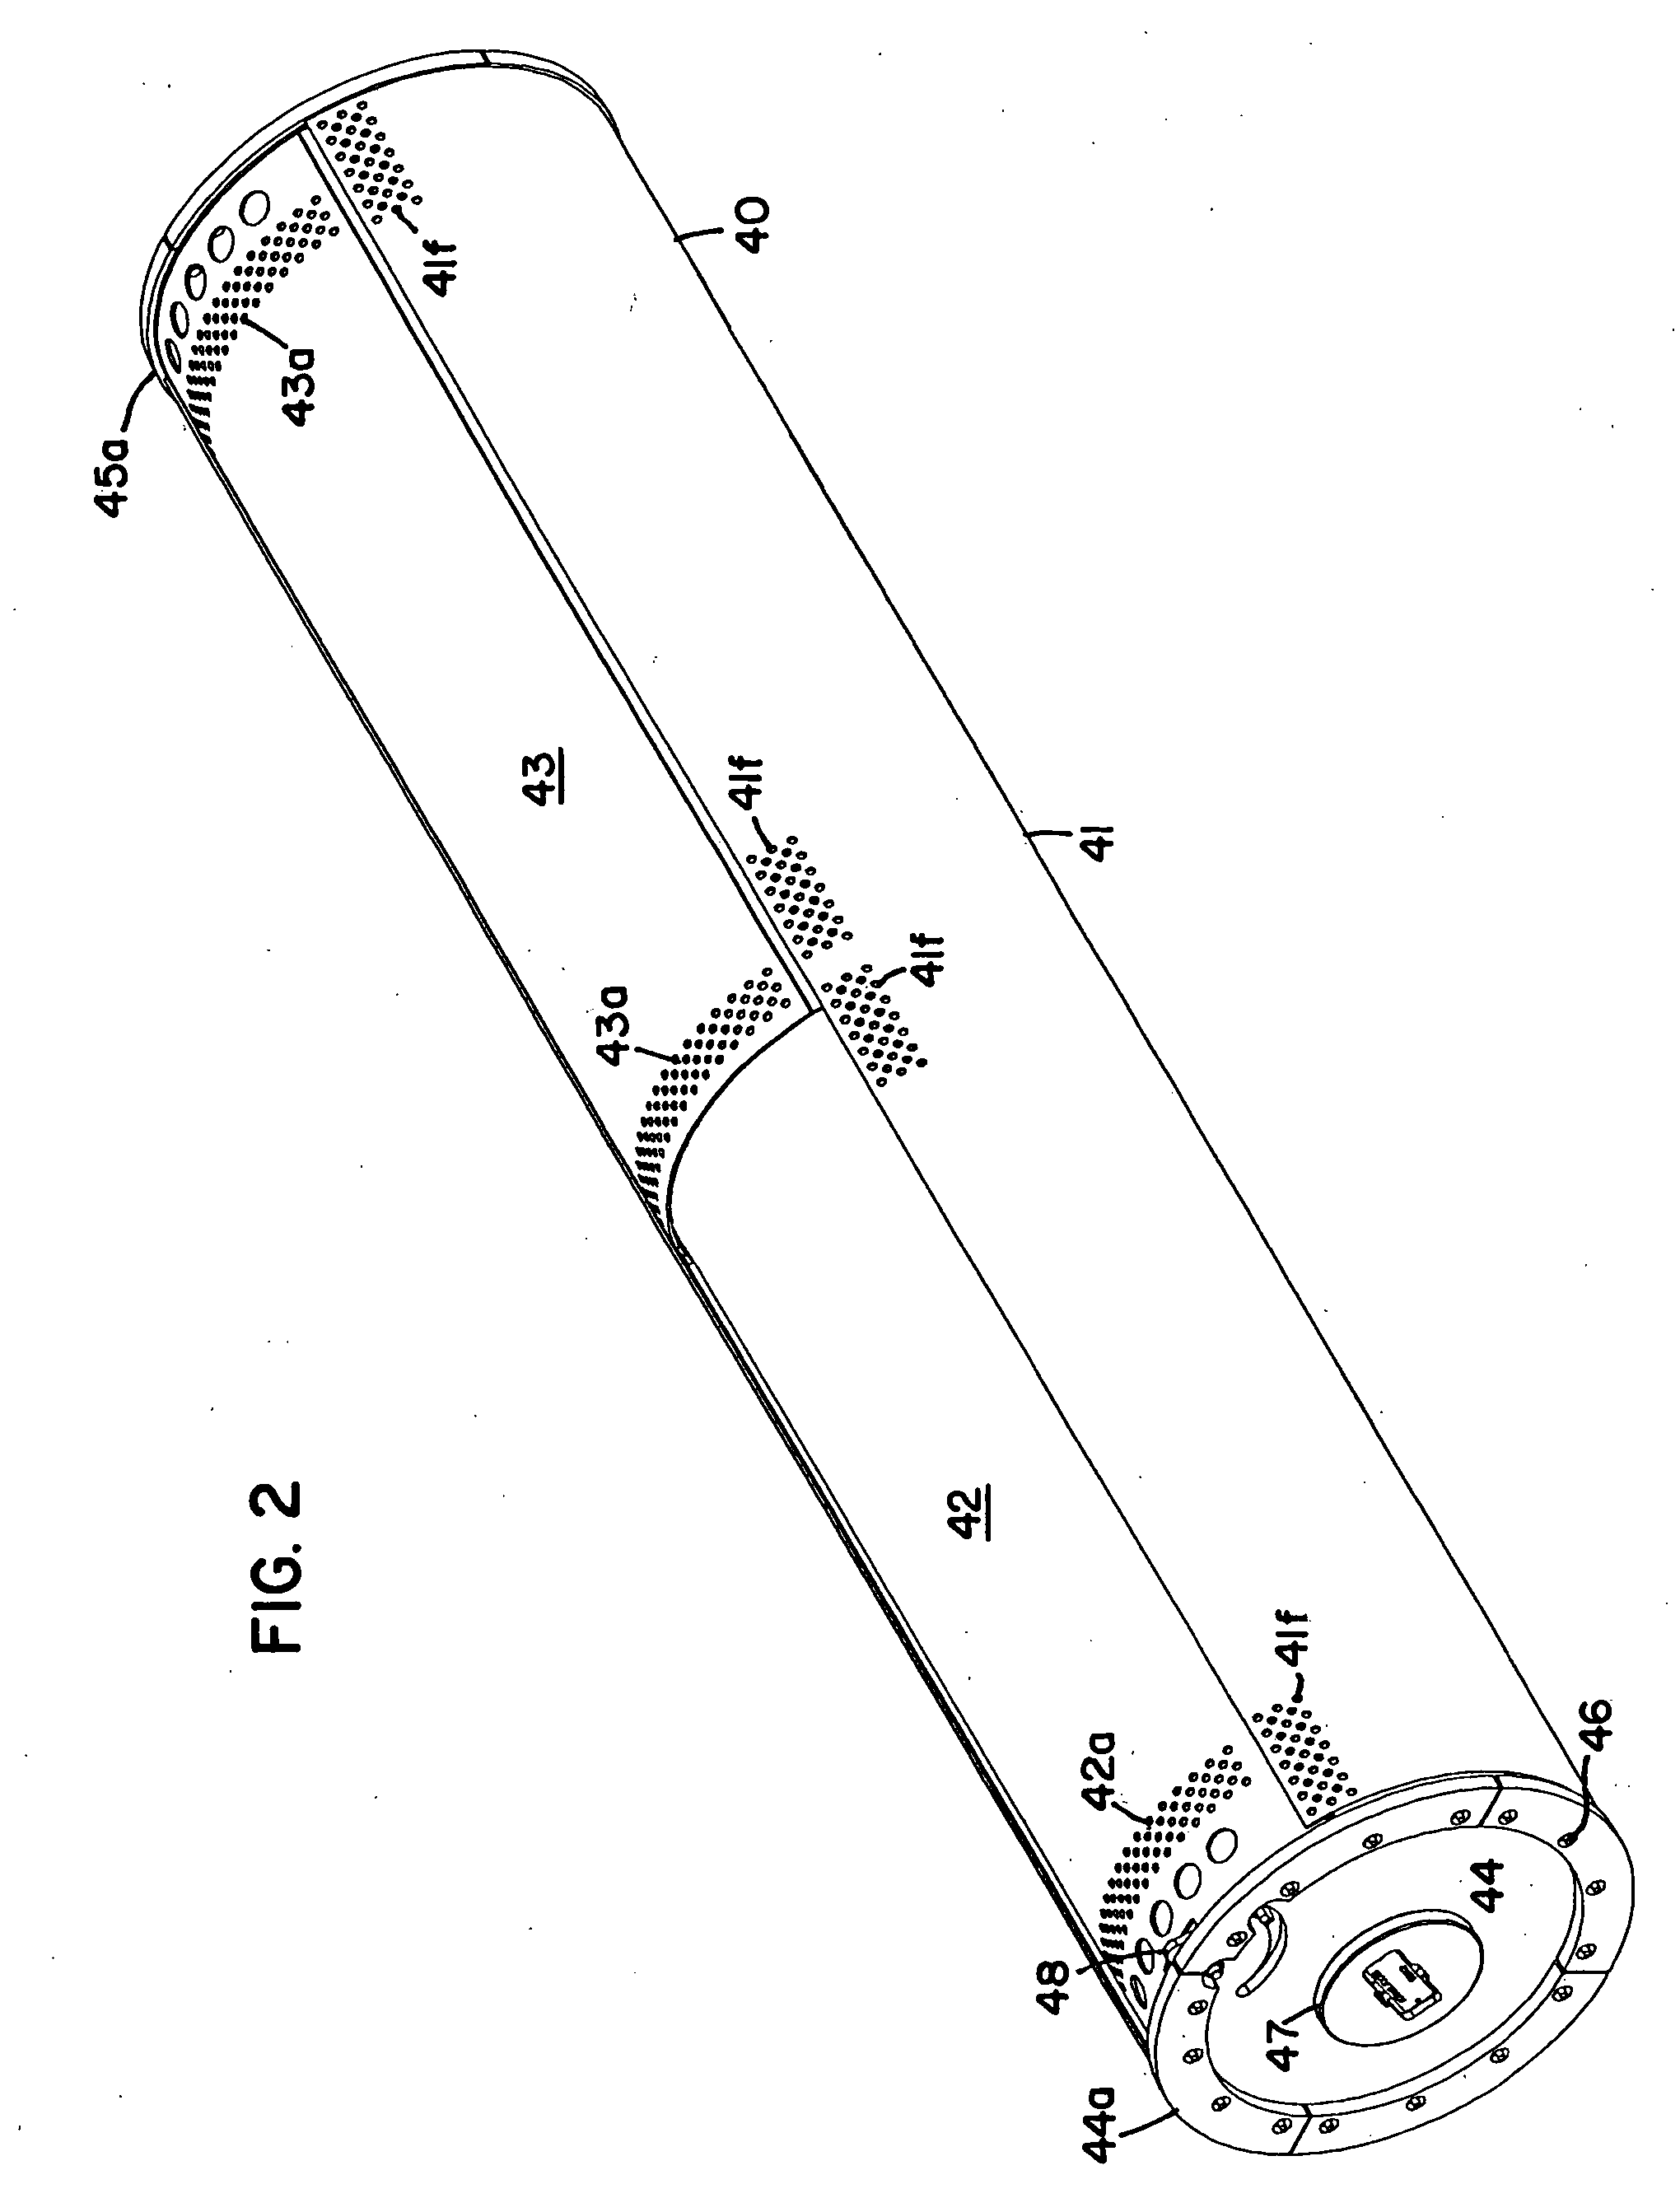 Method and apparatus for material handling for a food product using high pressure pasteurization